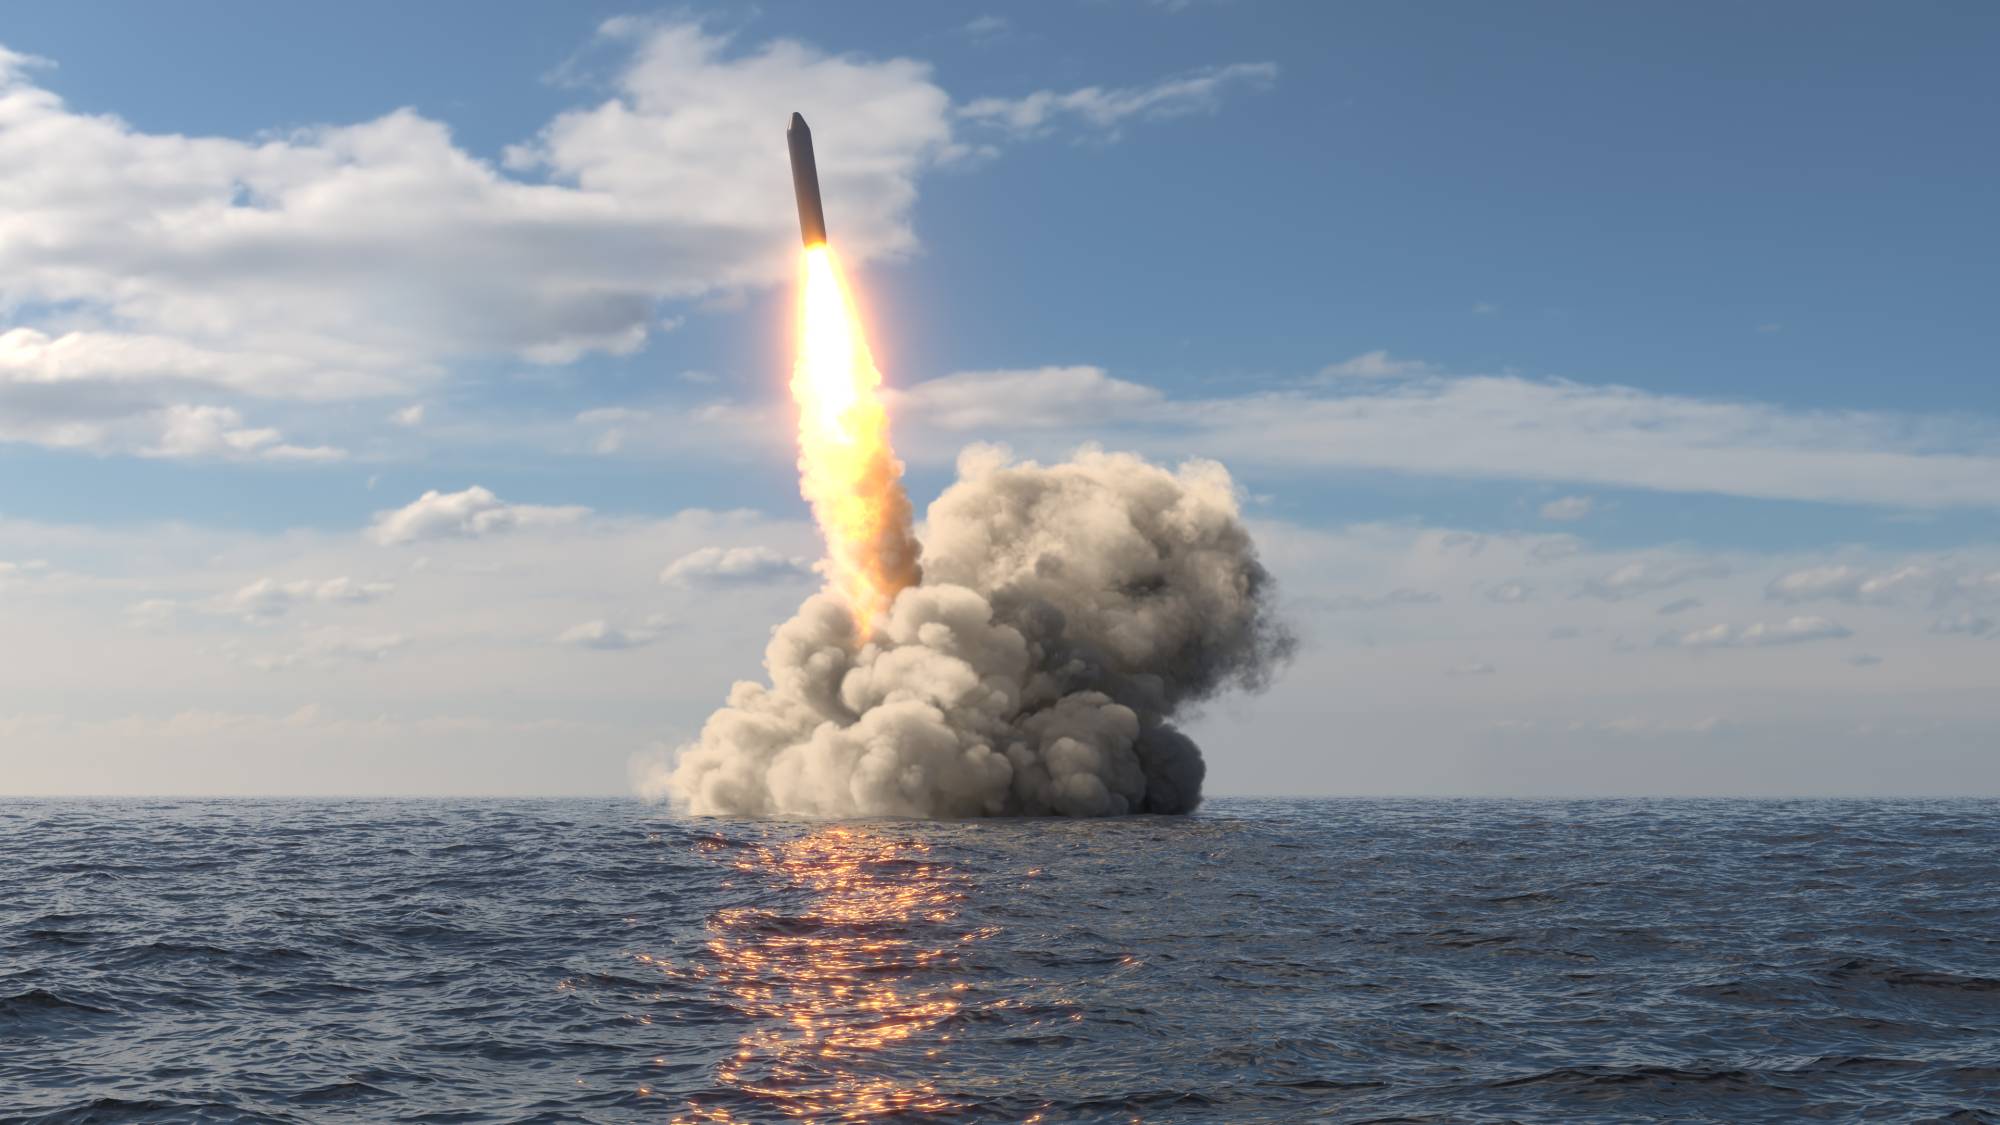 Ballistic missile launch from underwater